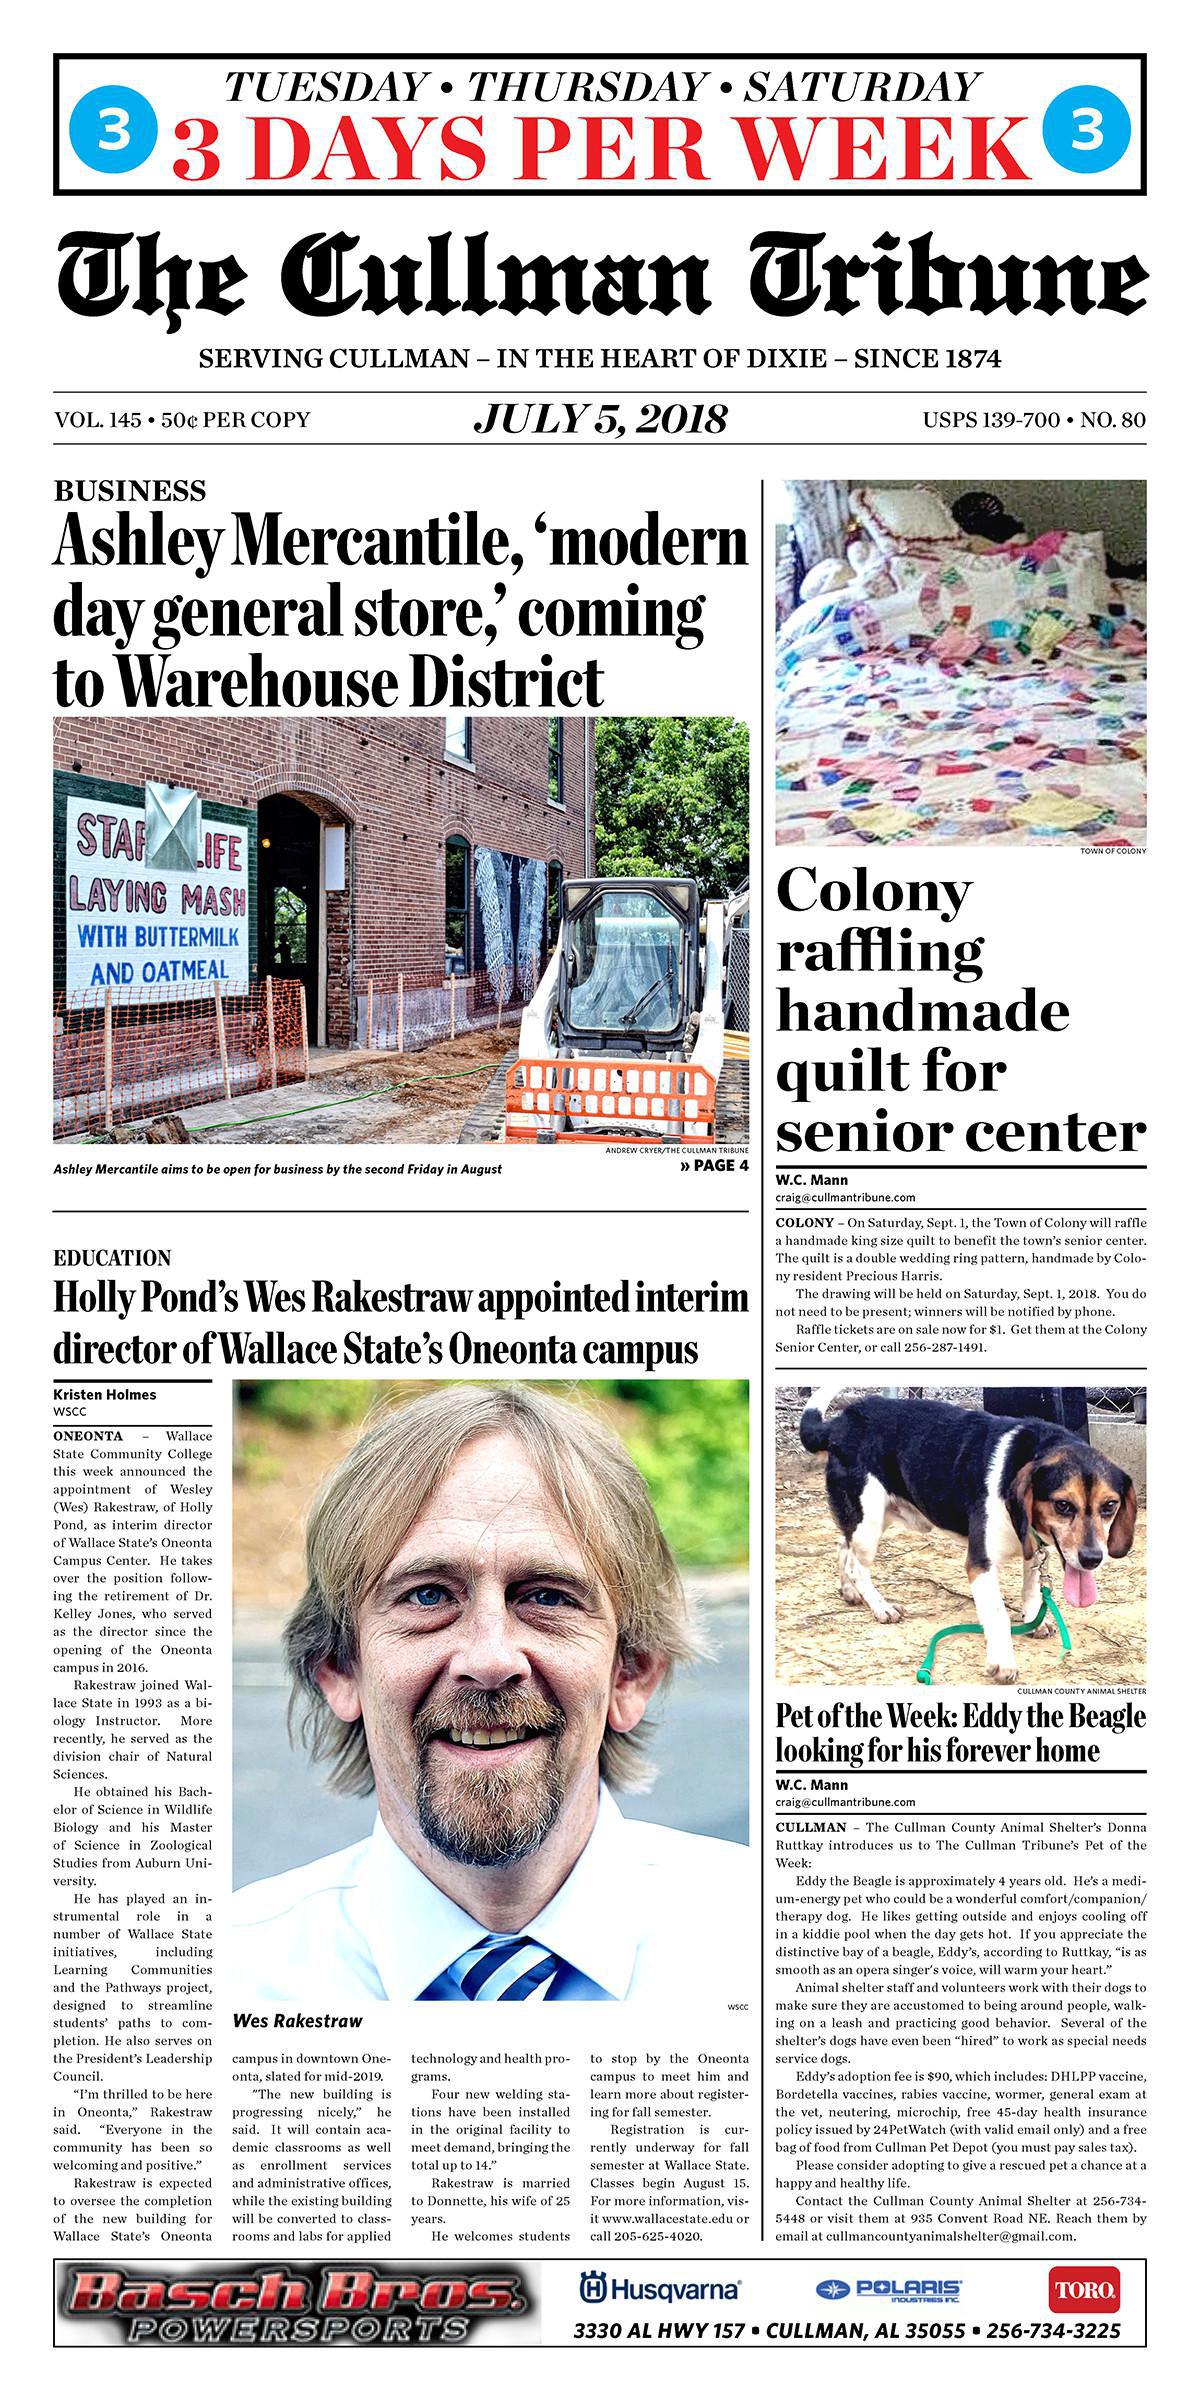 Good Morning Cullman! The 07-05-2018 edition of the Cullman Tribune is now ready to view